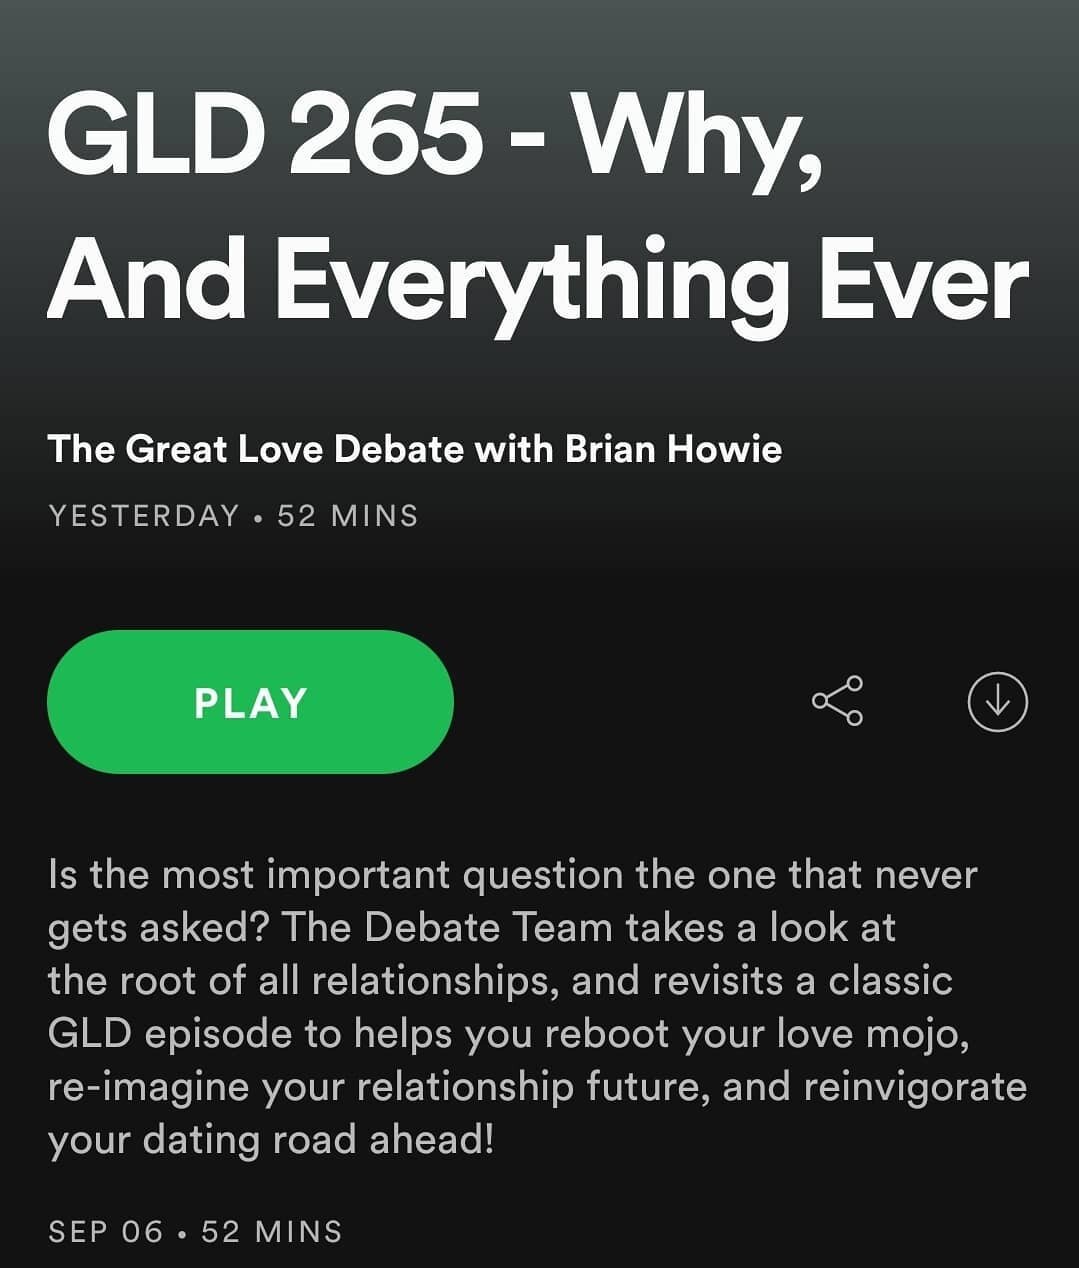 Happy Labor Day, brand-new GLD podcast now live to get you ready to get back out there! Listen now @applepodcasts @stitcherpodcasts @spotify @iheartradio and all your favorite platforms! #love #sex #dating #relationships #brianhowie #media #comedy #w